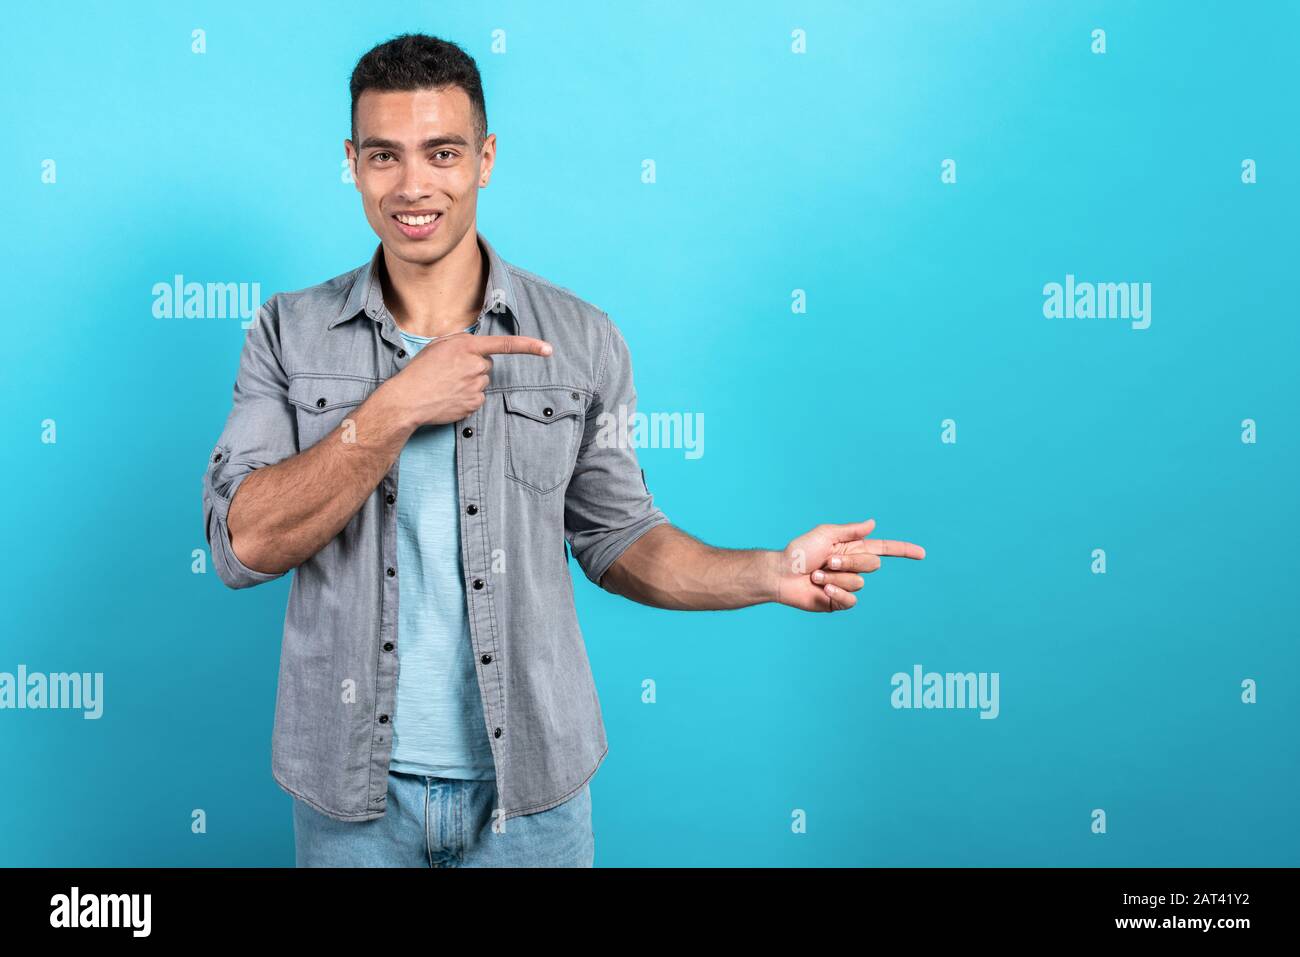 Happy mulatto  man smiling and pointing sideaway makes gesture from his fingers- Image Stock Photo